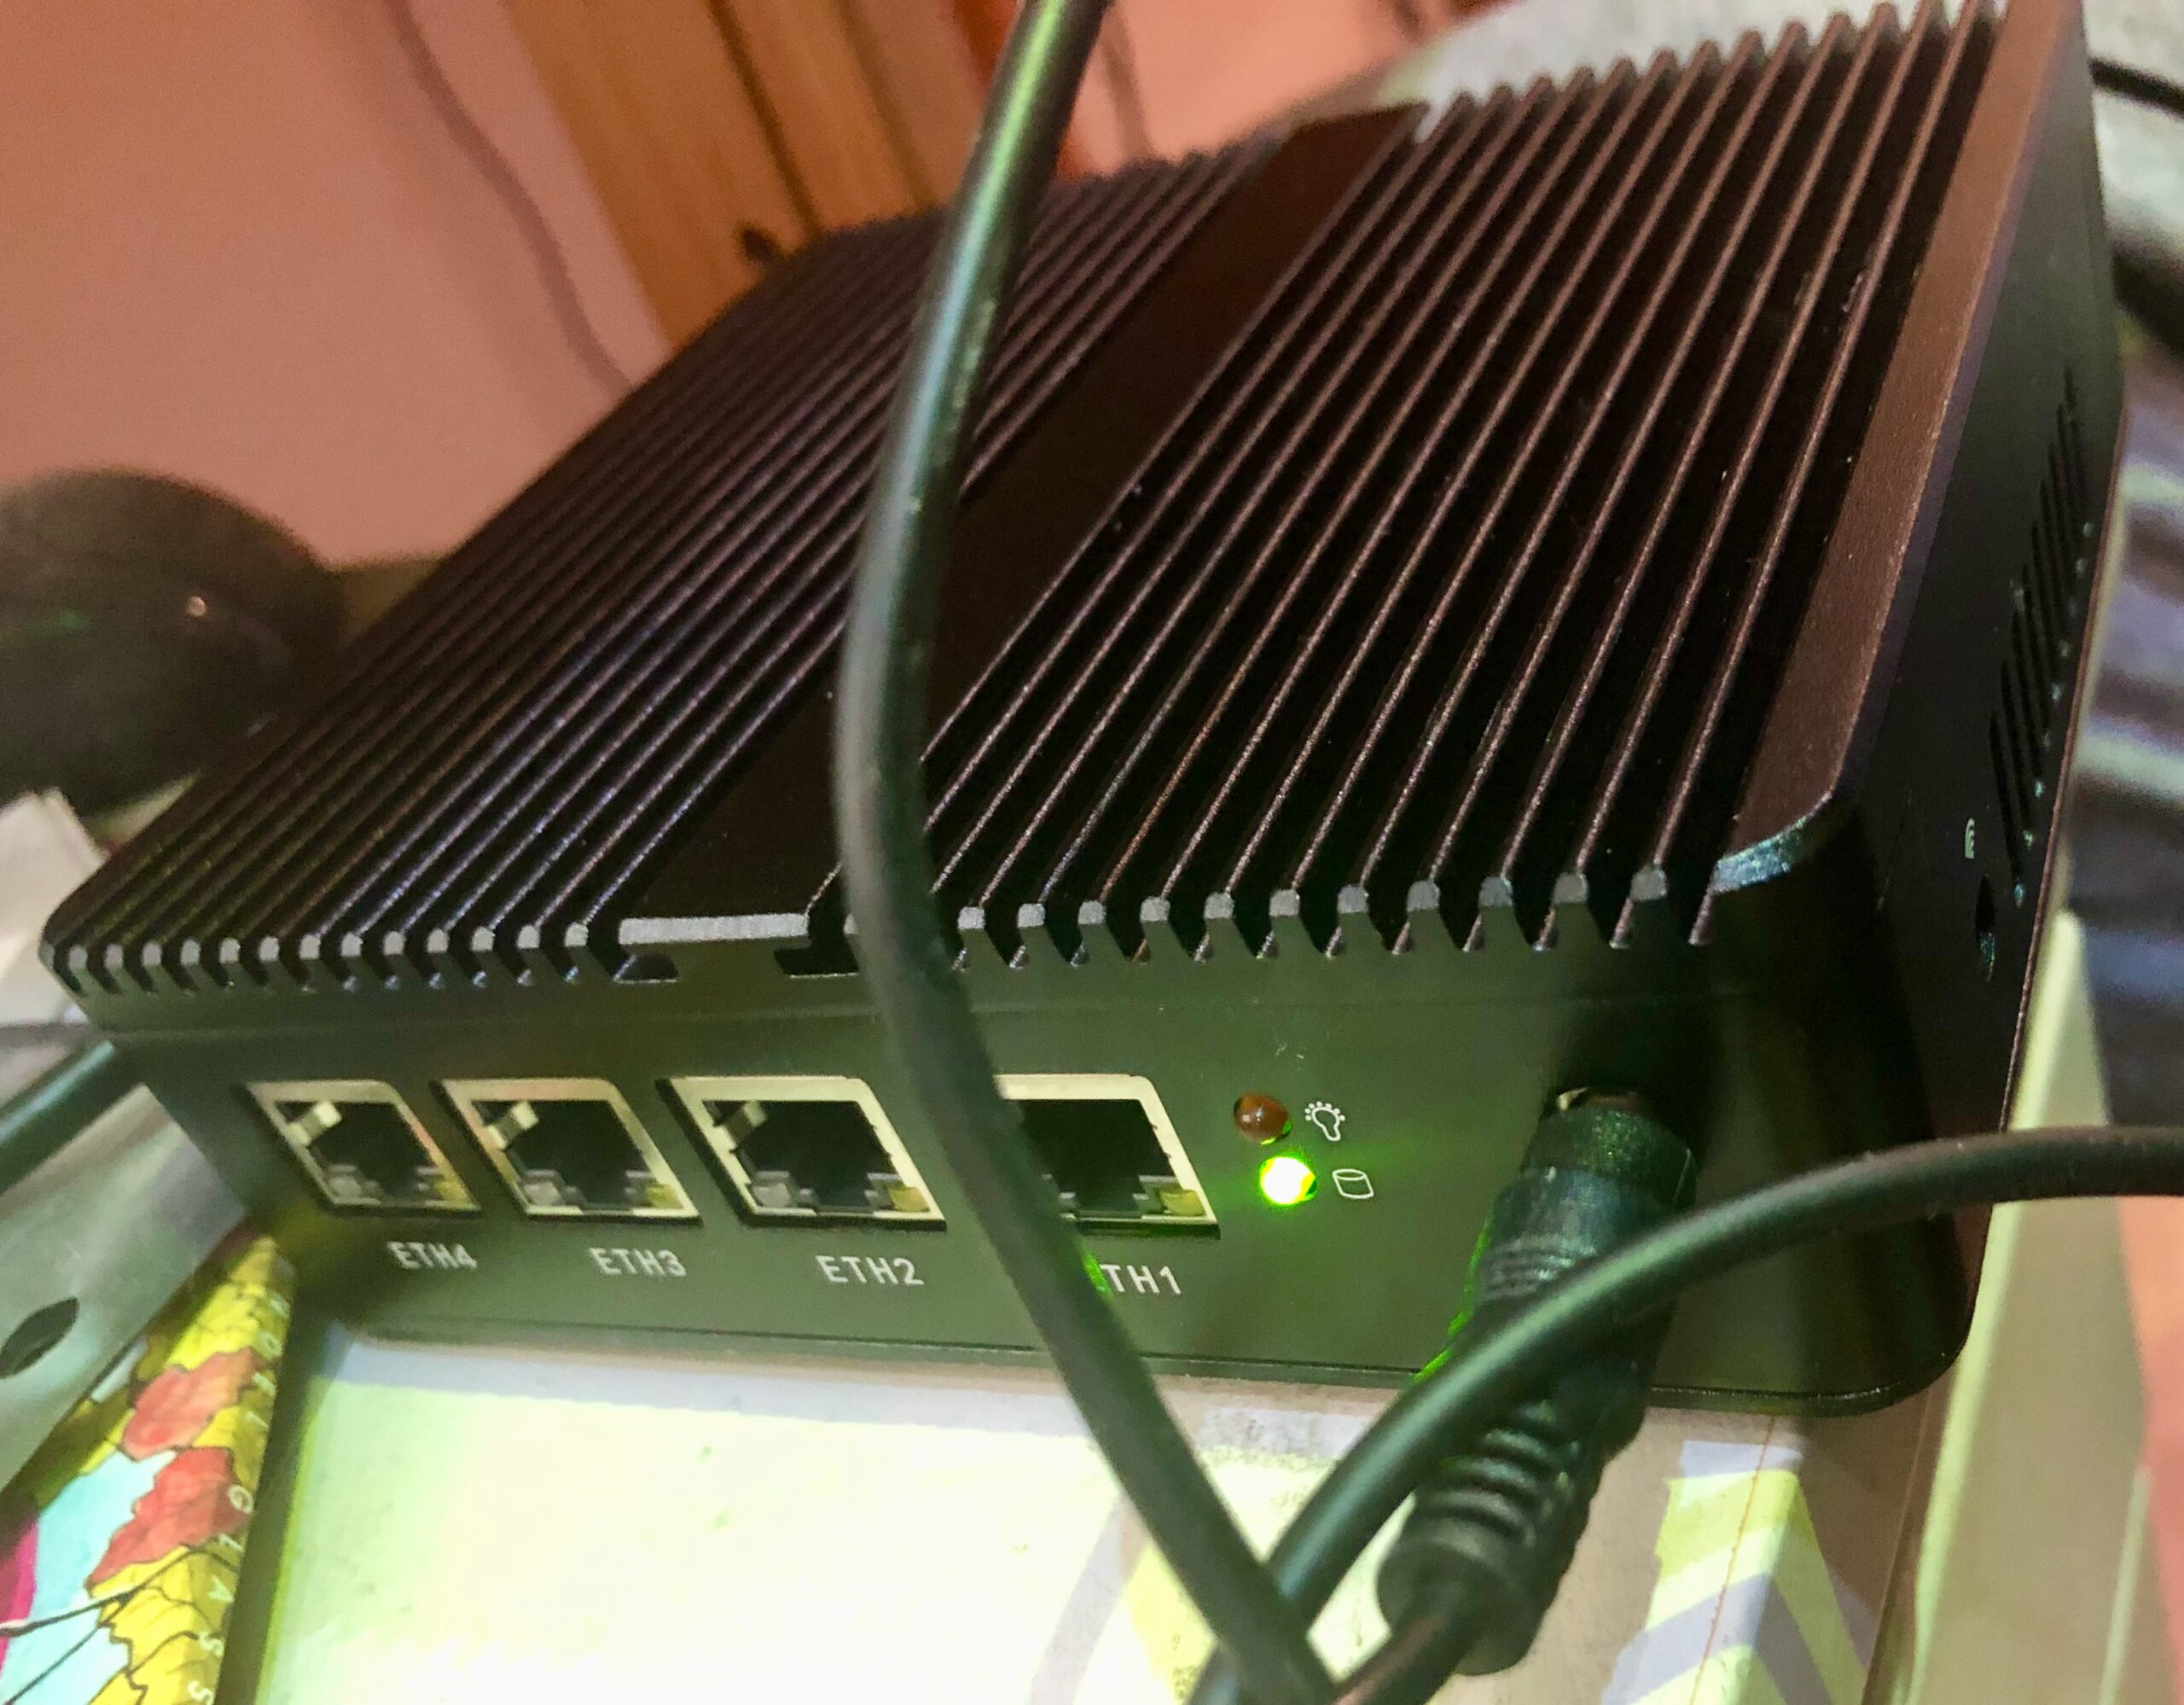 New project: IPv6 only home network